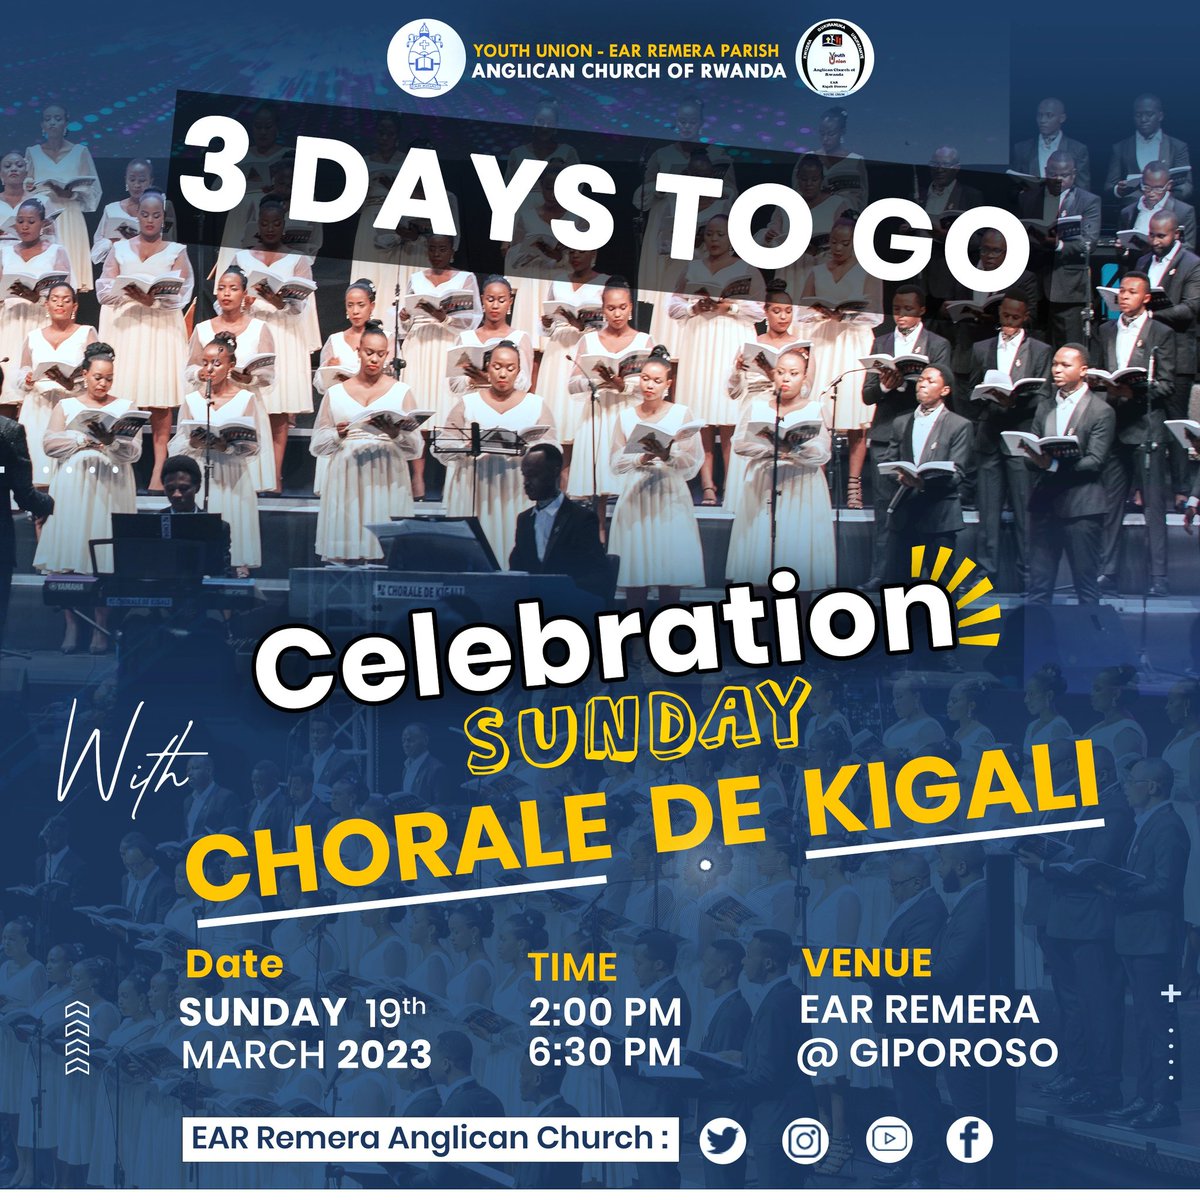 3 DAYS TO GO with CHORALE DE KIGALI. This Sunday 19/03/2023 @ 14:00-18:30pm. DON'T MISS @ear_remera GIPOROSO. Y'all Invited. 

@ChoraledeKigali